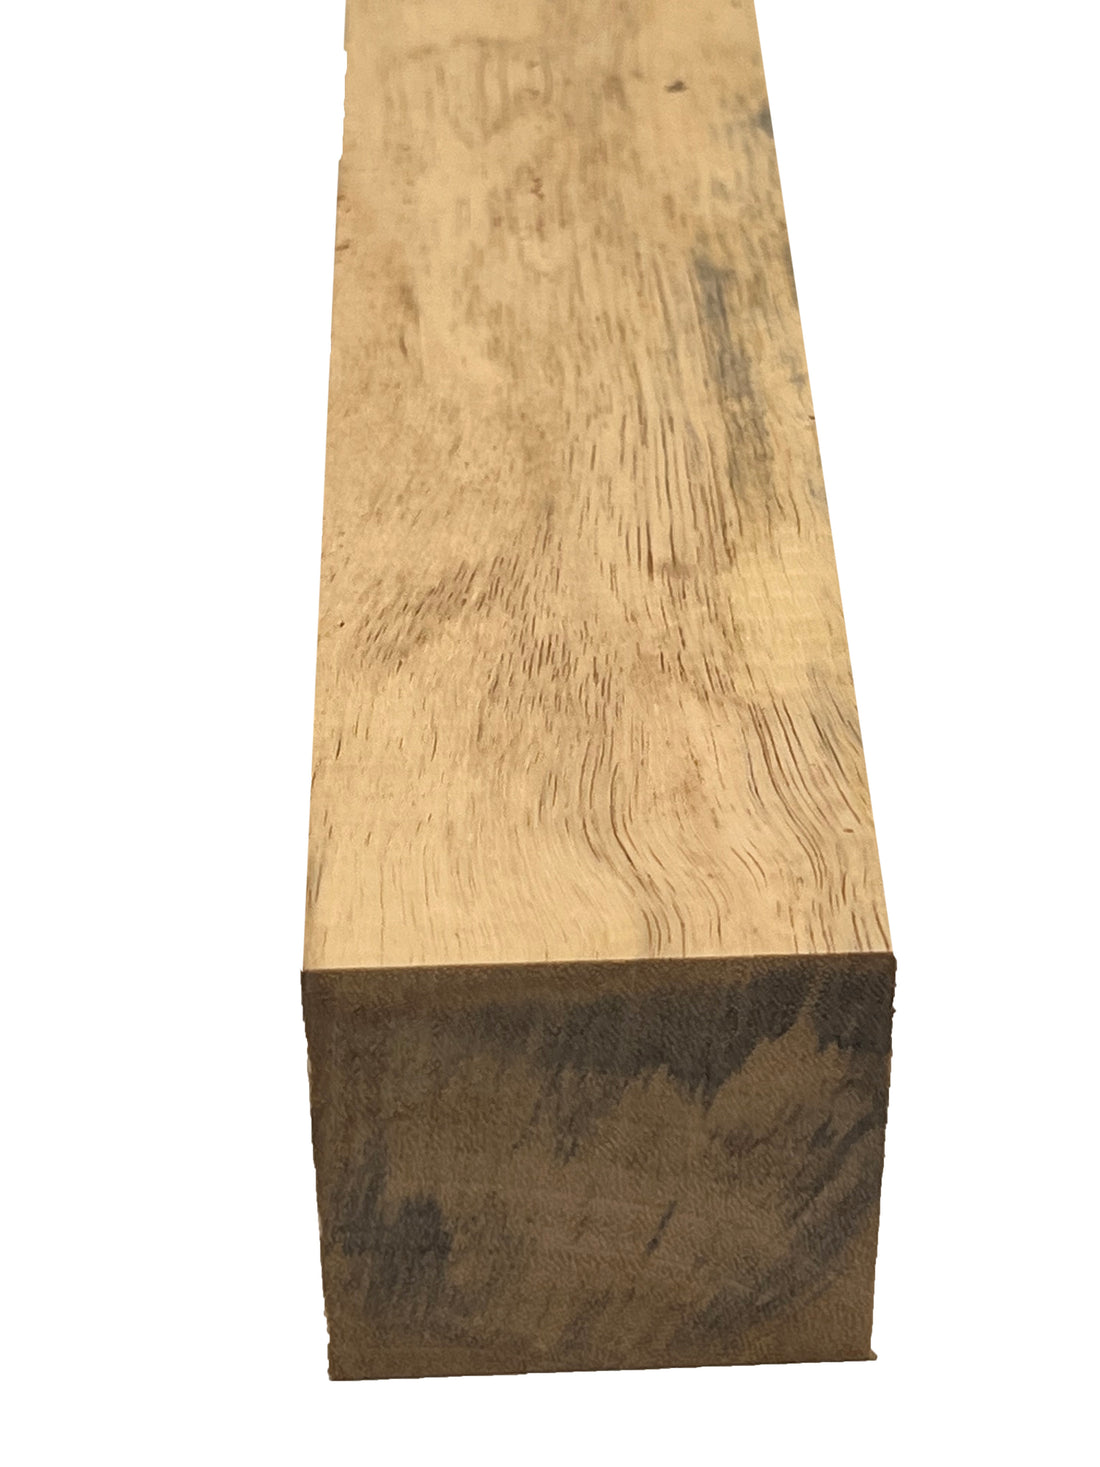 Combo Pack 5,Yellow Tamarind Turning Blanks 18” x 1-1/2” x 1-1/2” - Exotic Wood Zone - Buy online Across USA 